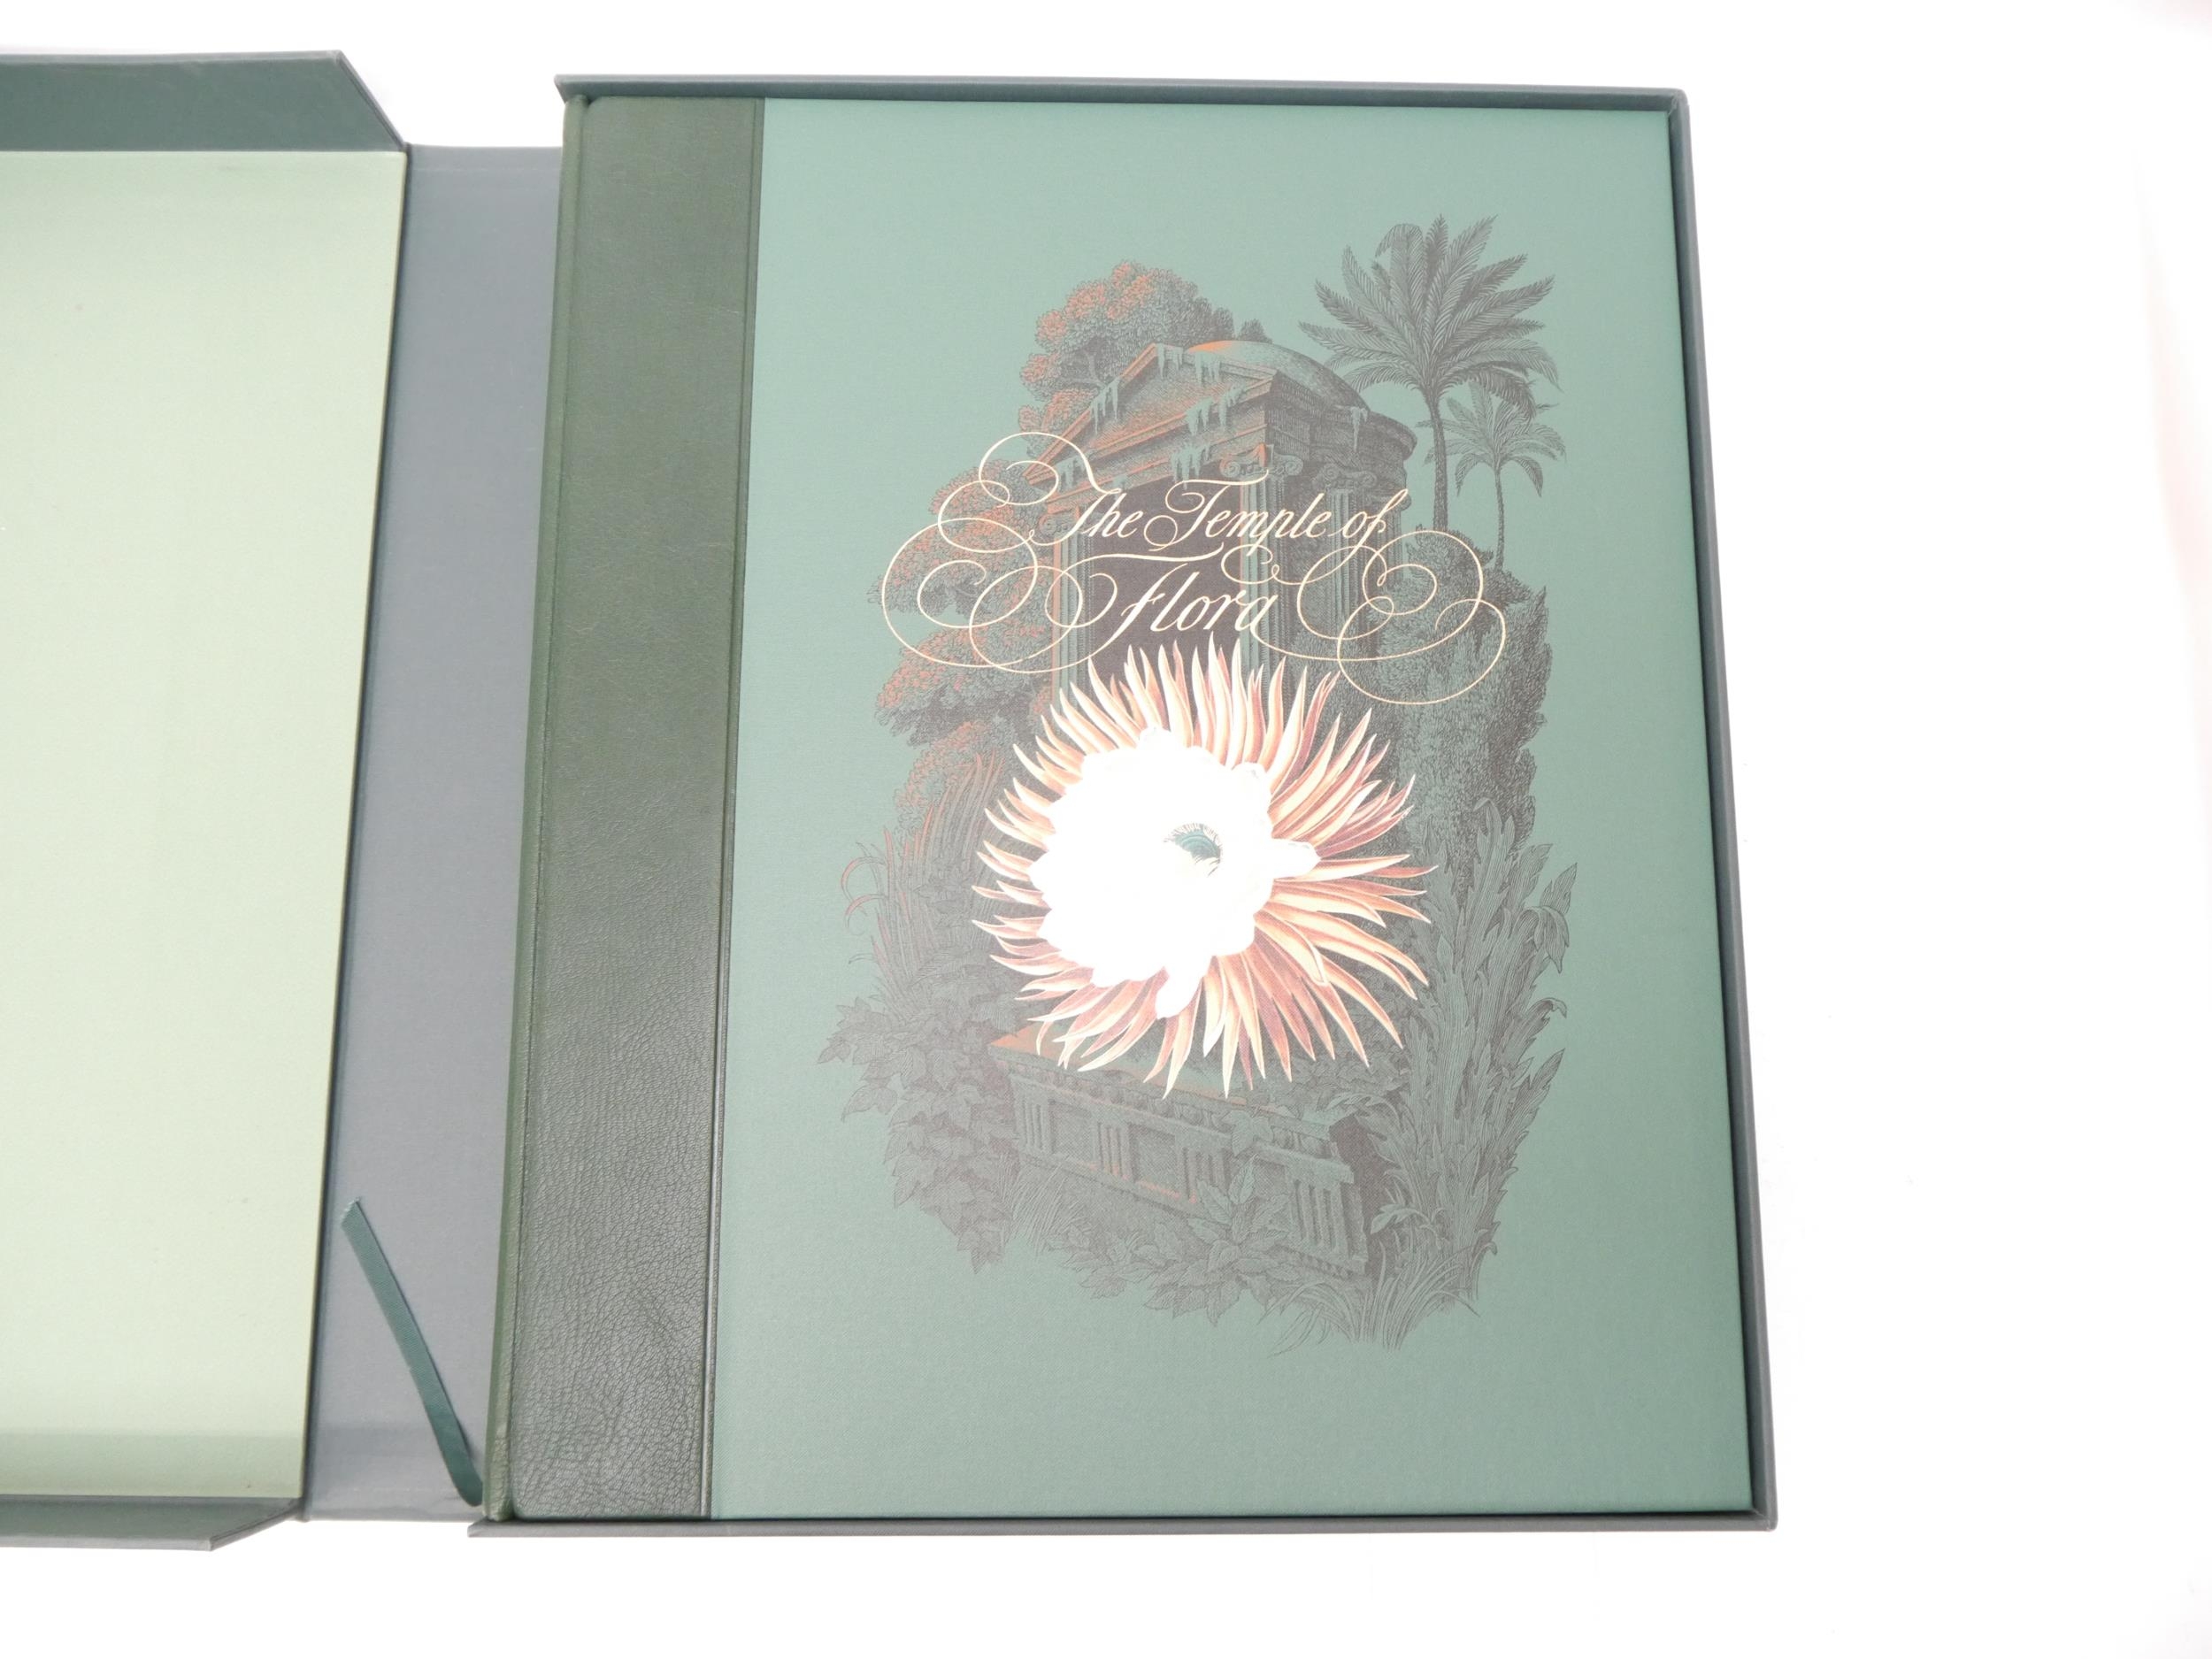 (Botany.) Robert Thornton: 'The Temple of Flora', London, The Folio Society, 2008, limited - Image 9 of 16